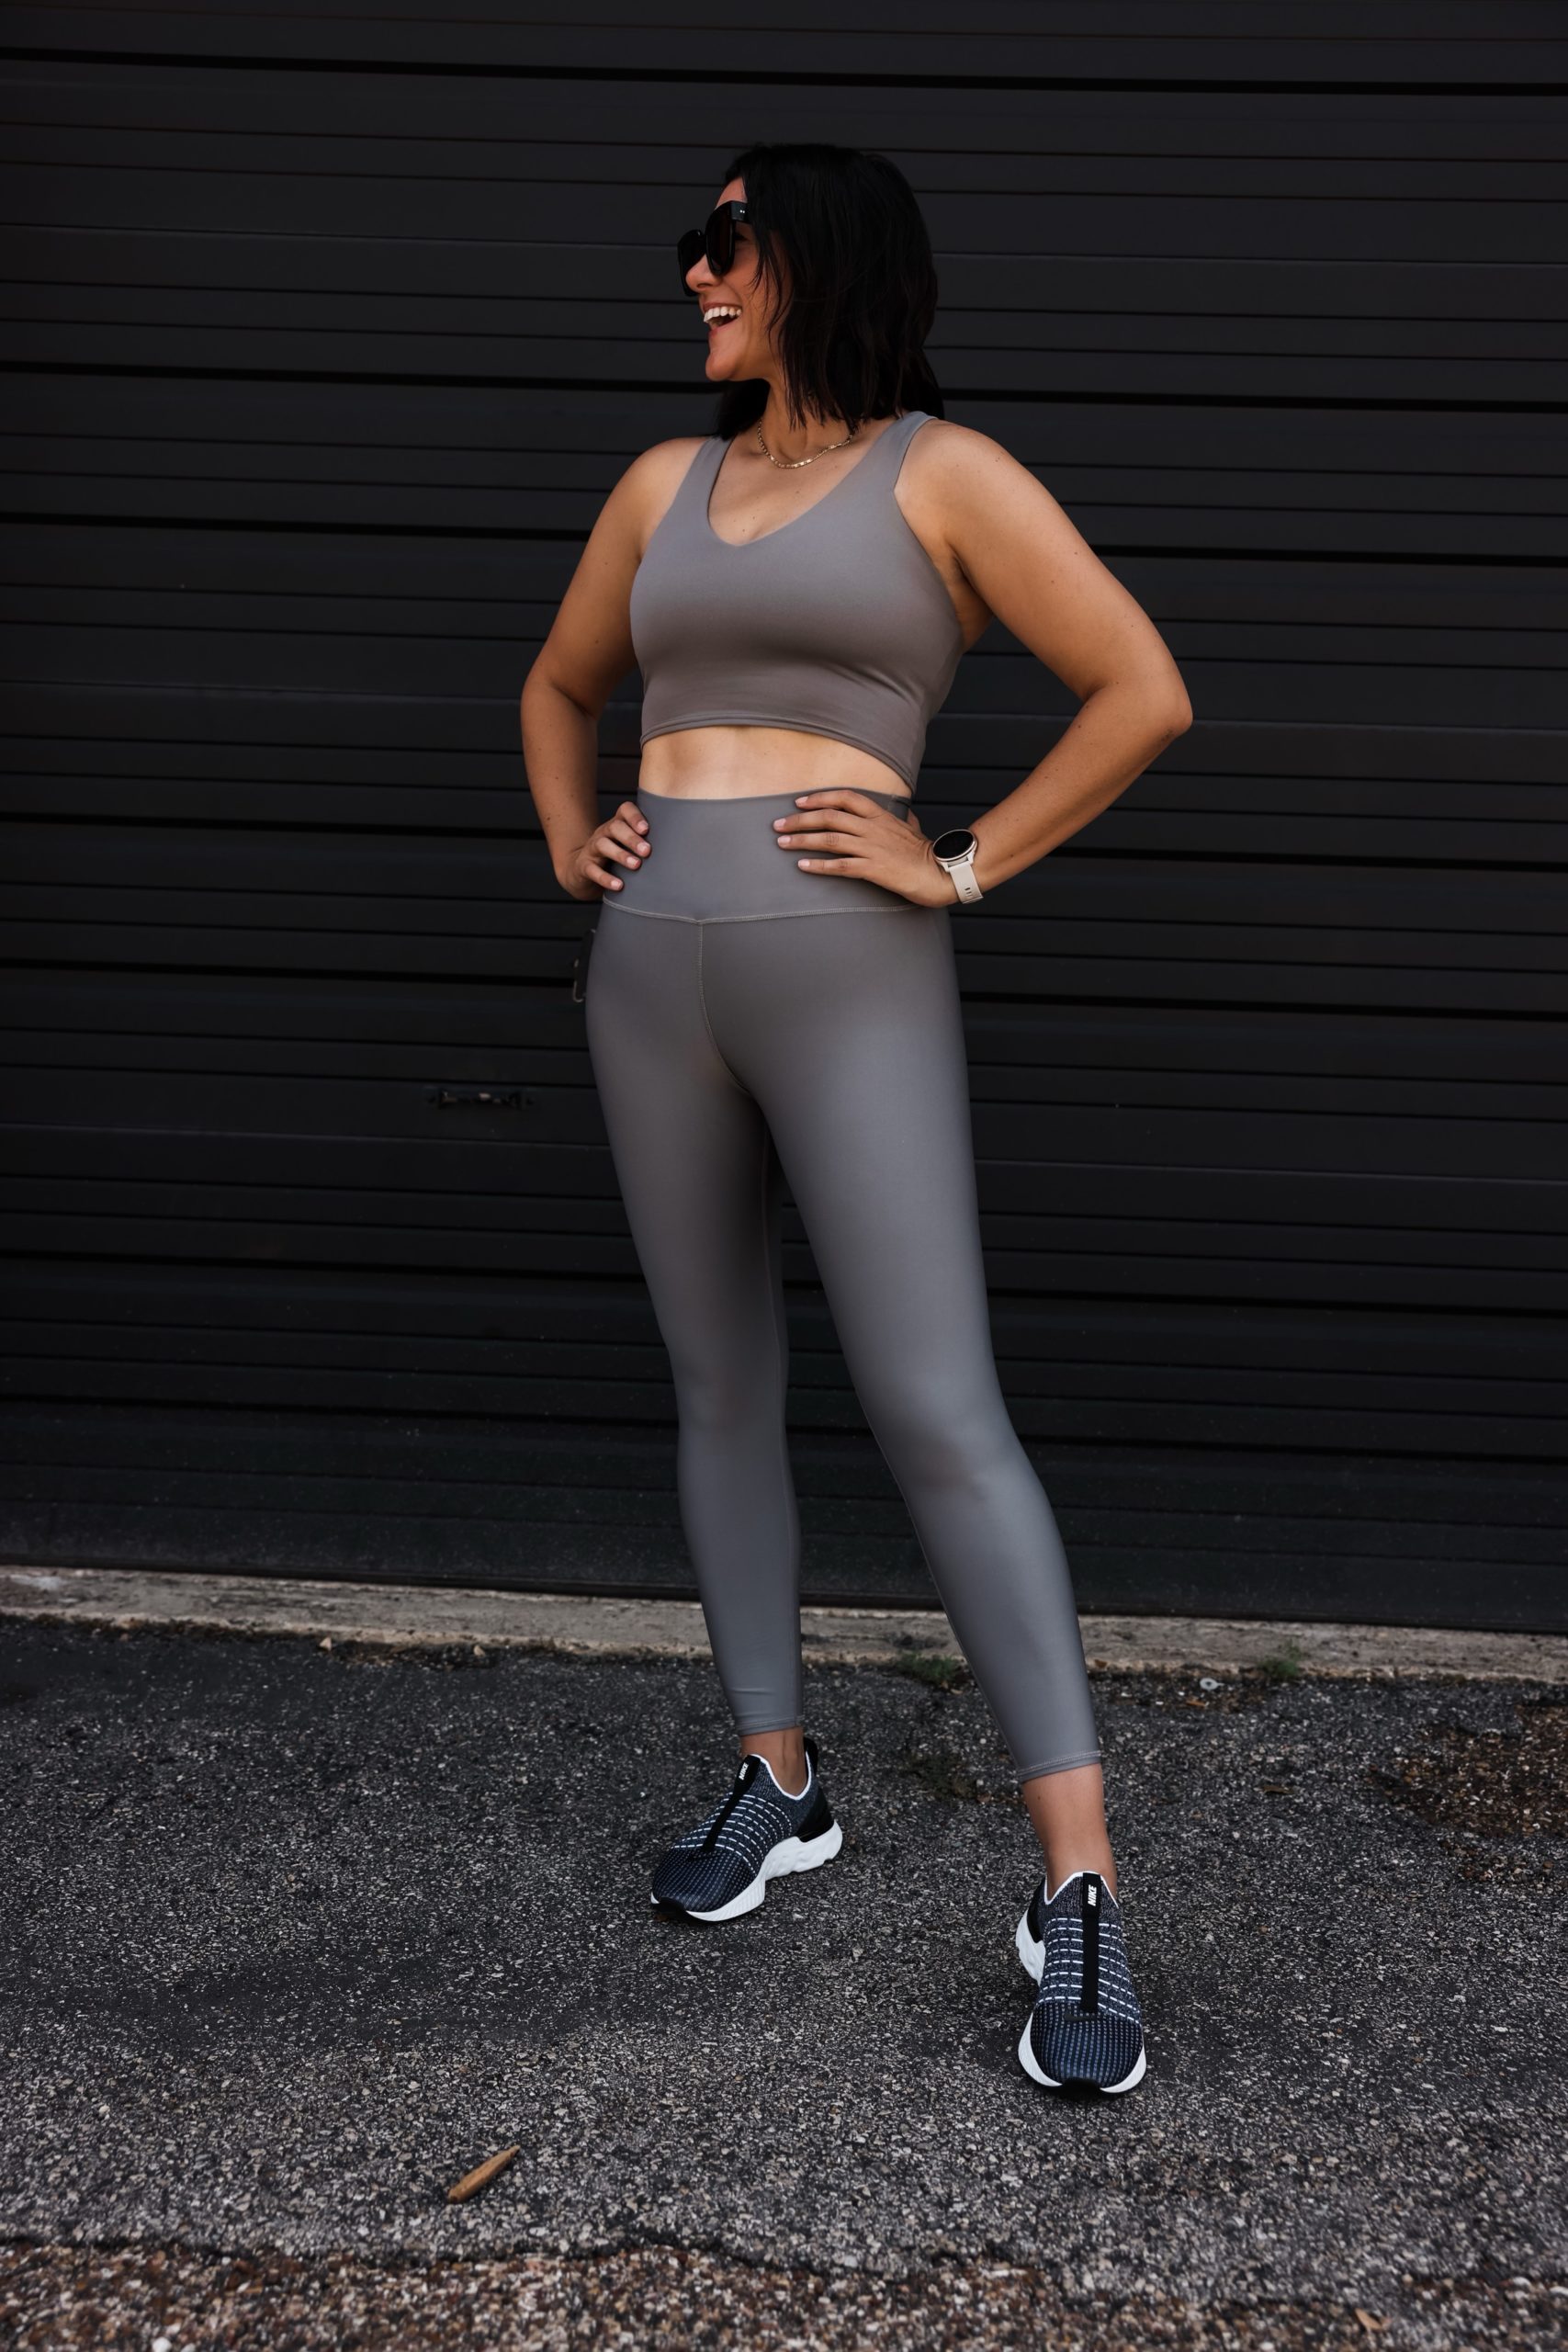 https://www.kendieveryday.com/wp-content/uploads/2021/07/Kendi-Everyday-wearing-Alo-Airlift-Leggings-outfit-03-scaled.jpg